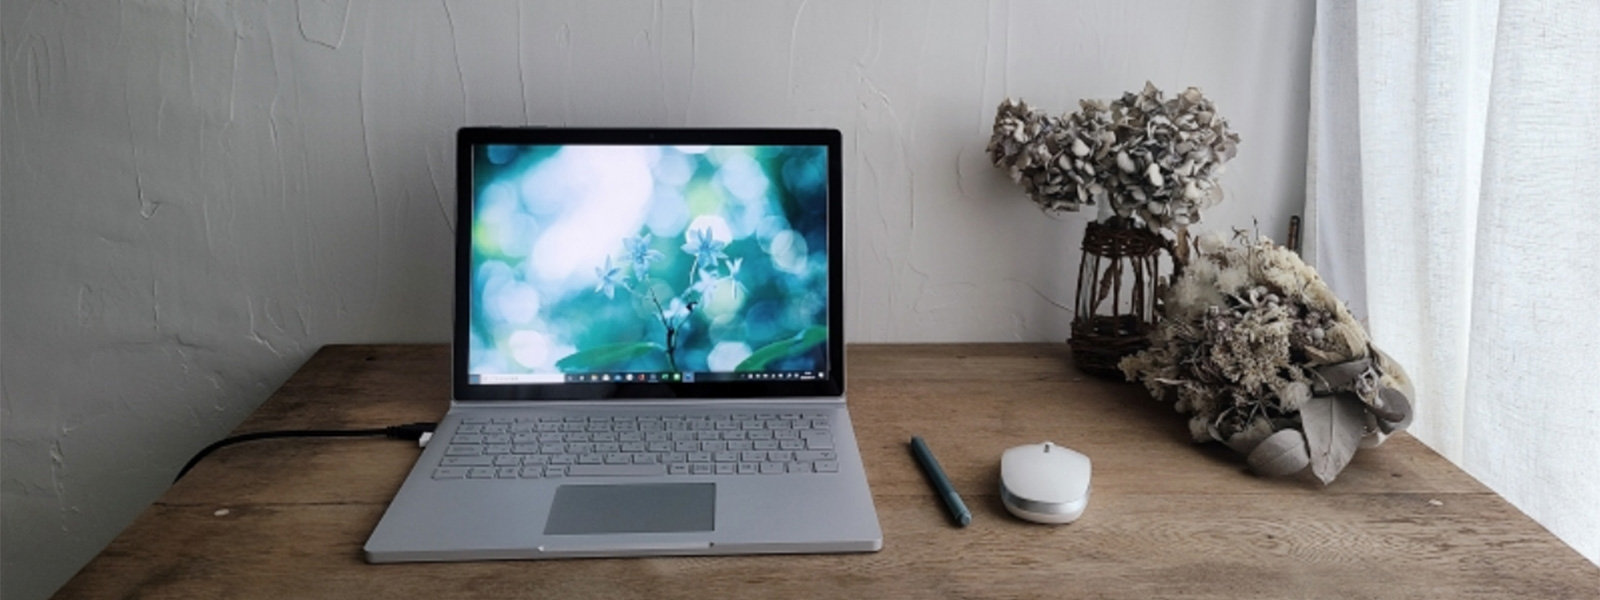 Surface Book 3、Surface ペン、Surface Dial、机の上の植物